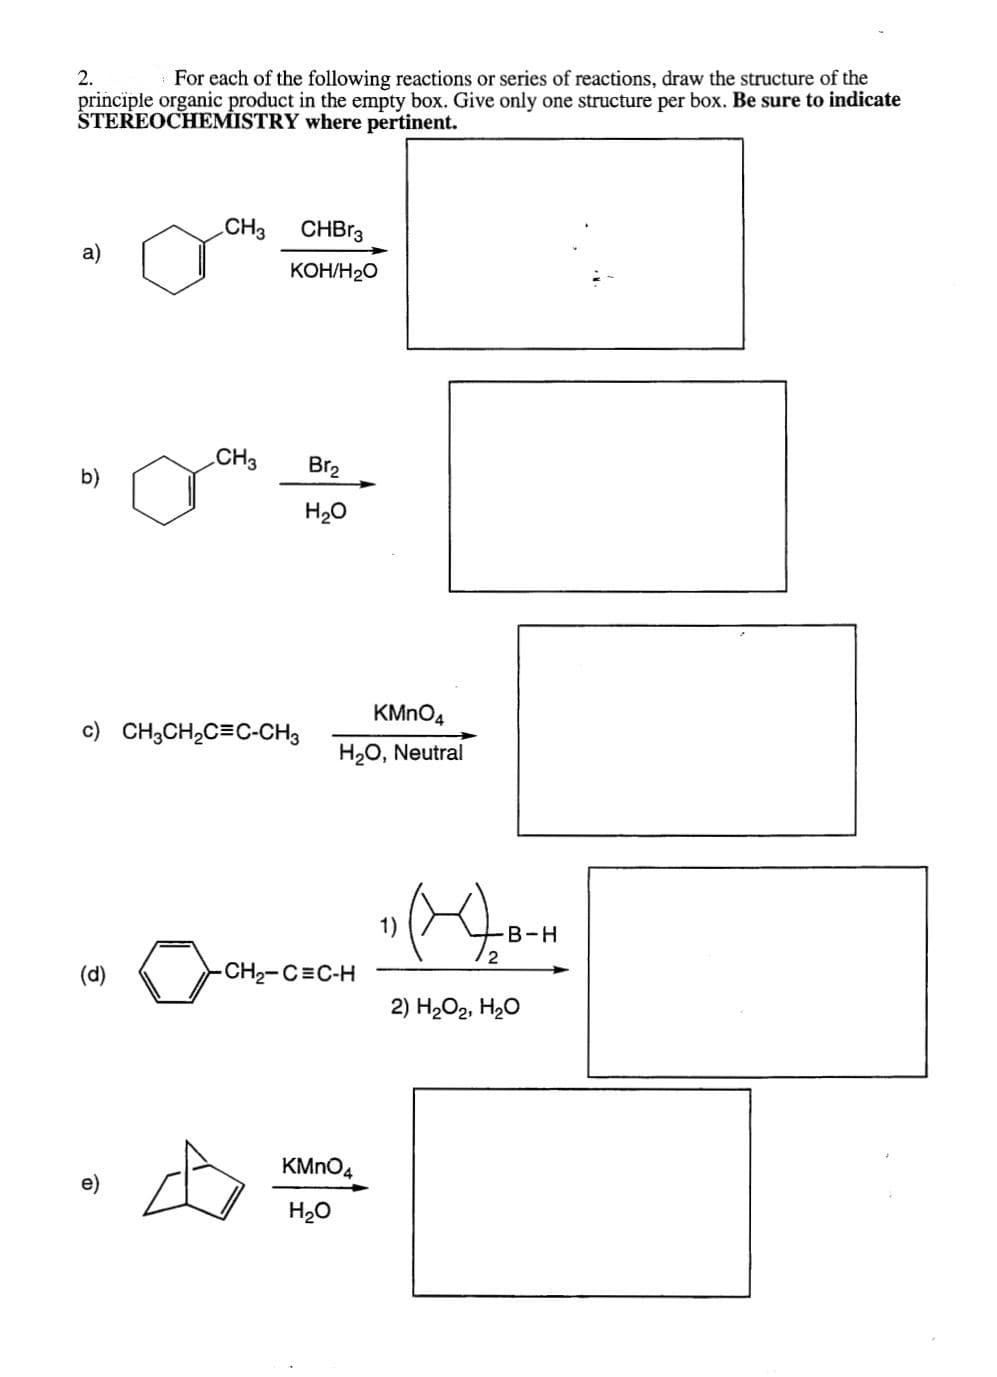 2.
For each of the following reactions or series of reactions, draw the structure of the
principle organic product in the empty box. Give only one structure per box. Be sure to indicate
STEREOCHEMISTRY where pertinent.
a)
b)
(d)
CH3
e)
CH3
c) CH3CH₂C=C-CH3
CHBr3
KOH/H₂O
Br₂
H₂O
KMnO4
H₂O, Neutral
CH₂-CEC-H
KMnO4
H₂O
1)
(₂
B-H
2) H₂O₂, H₂O